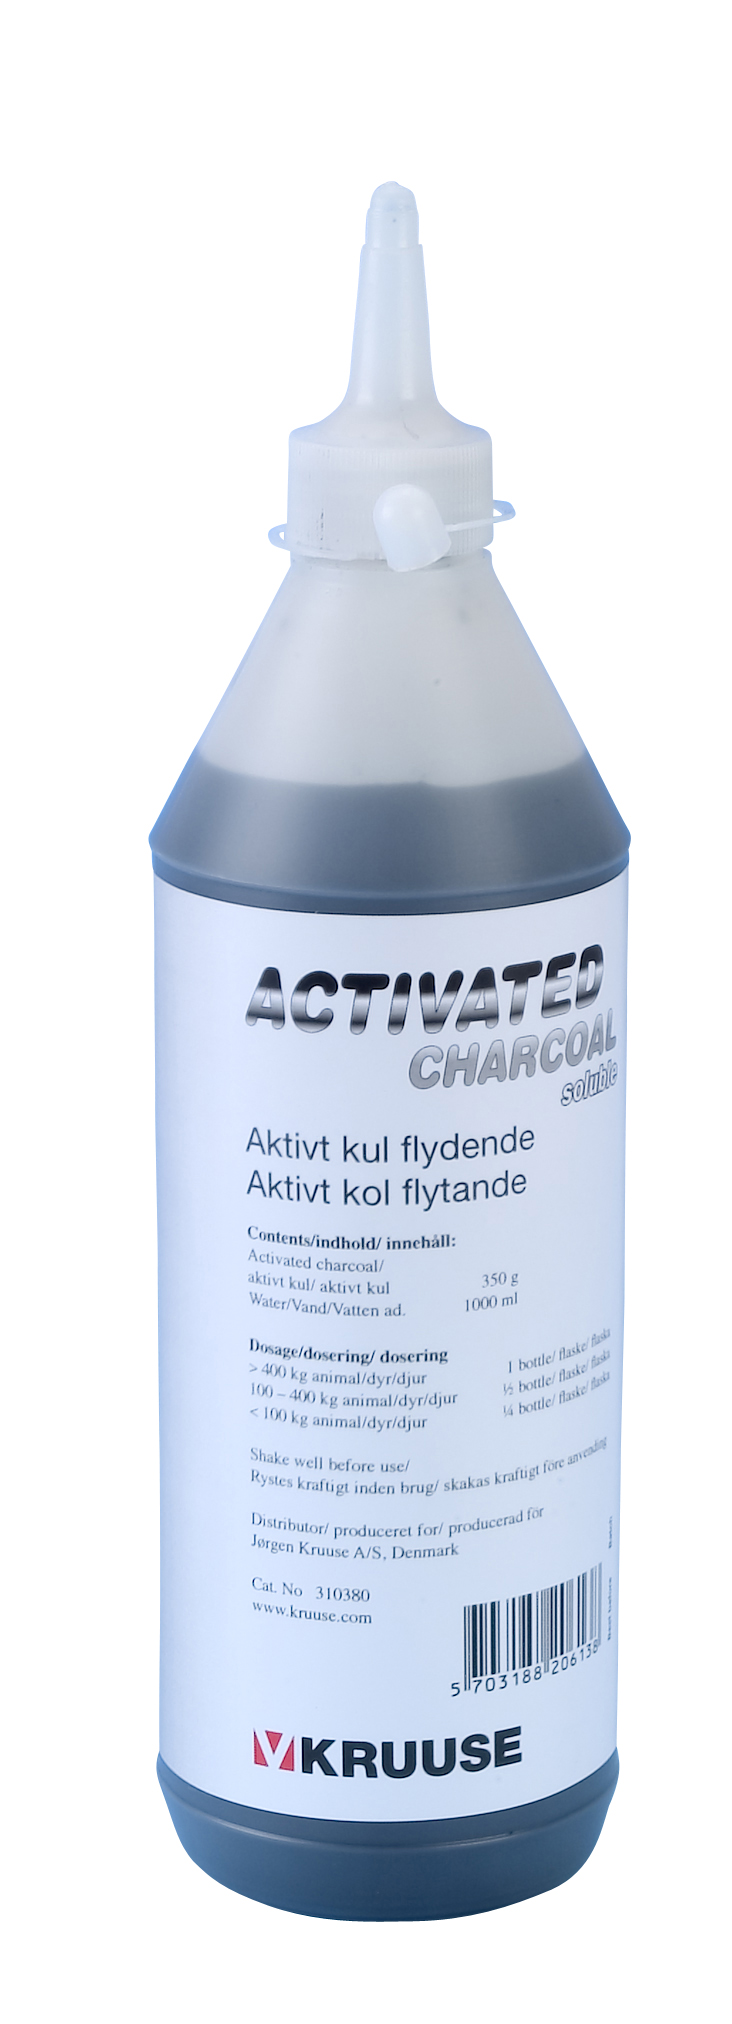 KRUUSE Activated charcoal - soluble, 1 l